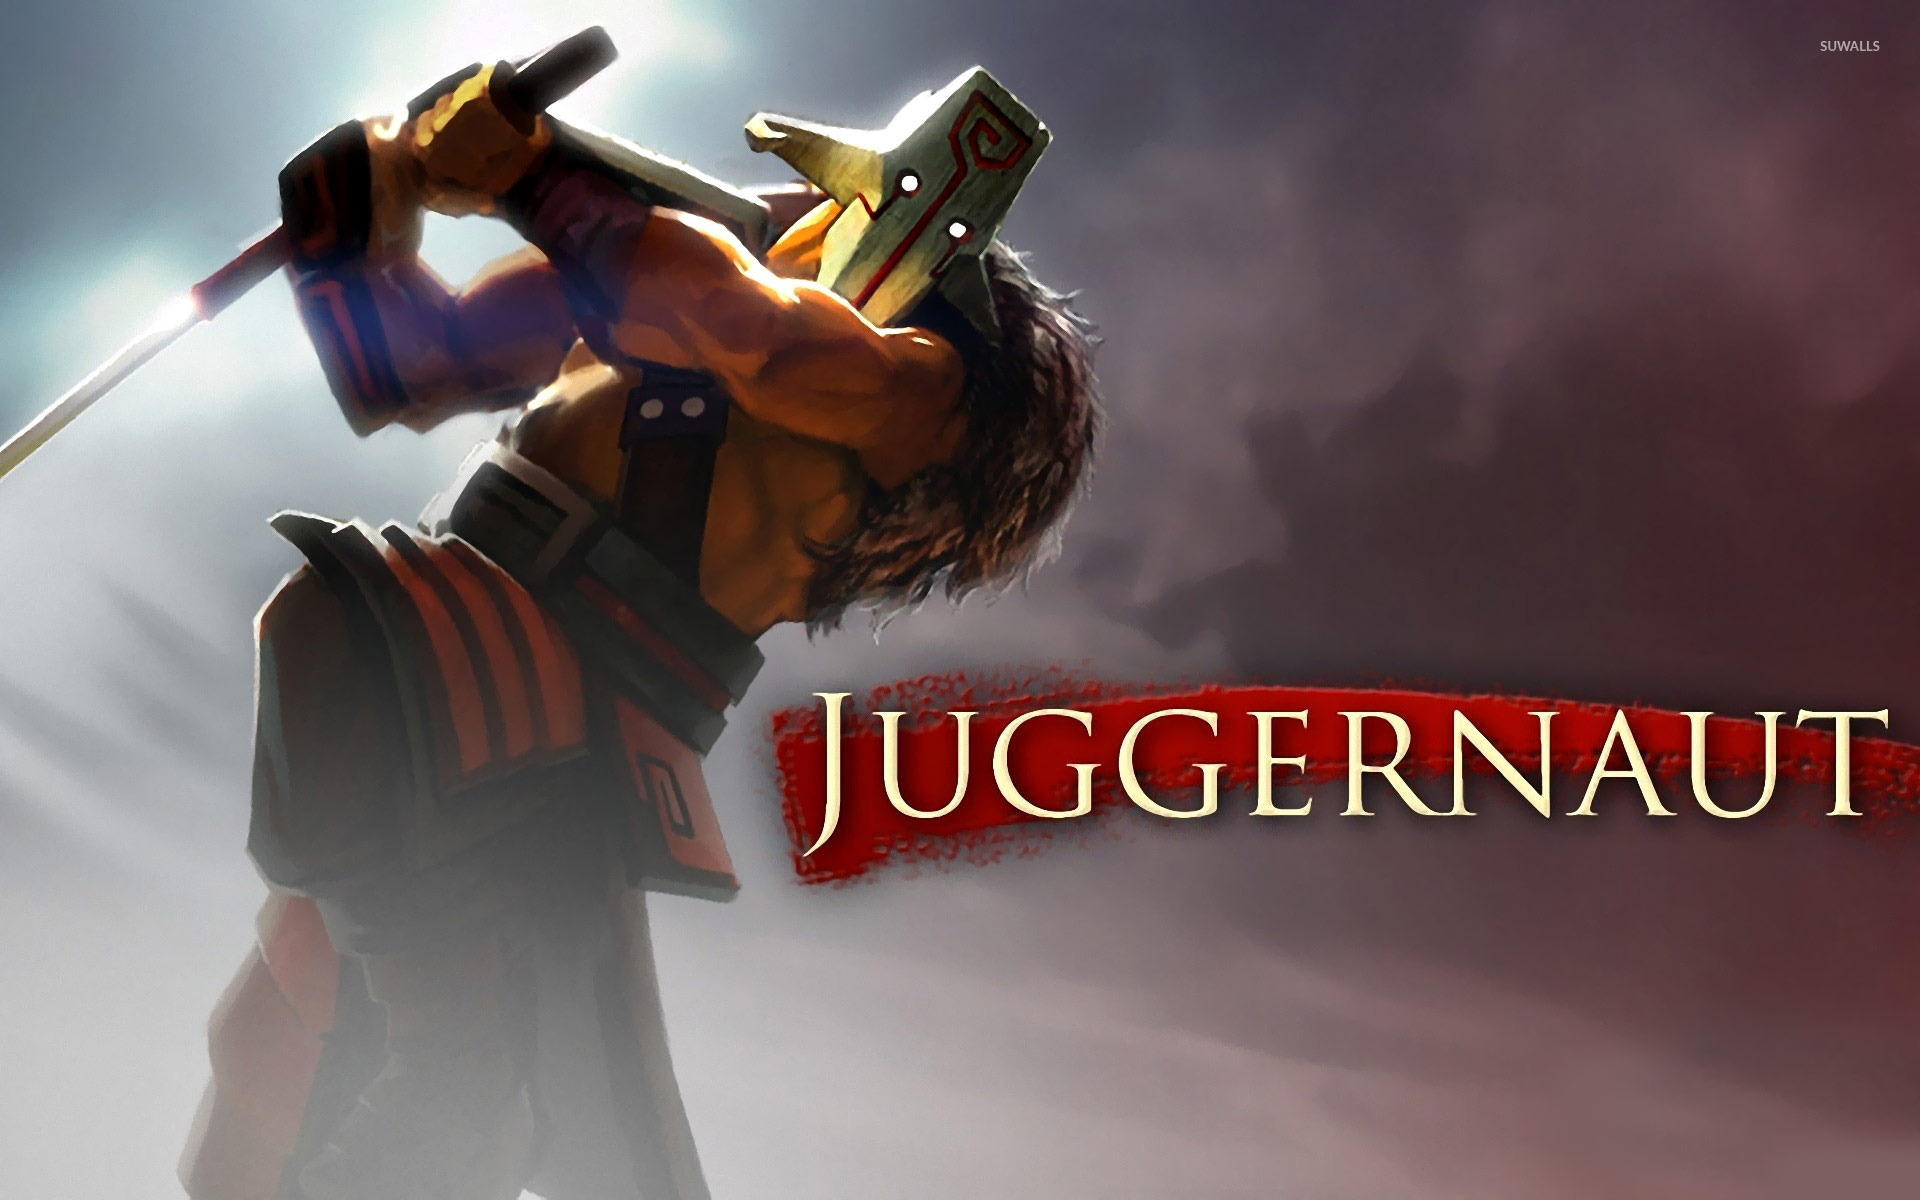 Download wallpapers juggernaut for desktop free High Quality HD pictures  wallpapers  Page 1